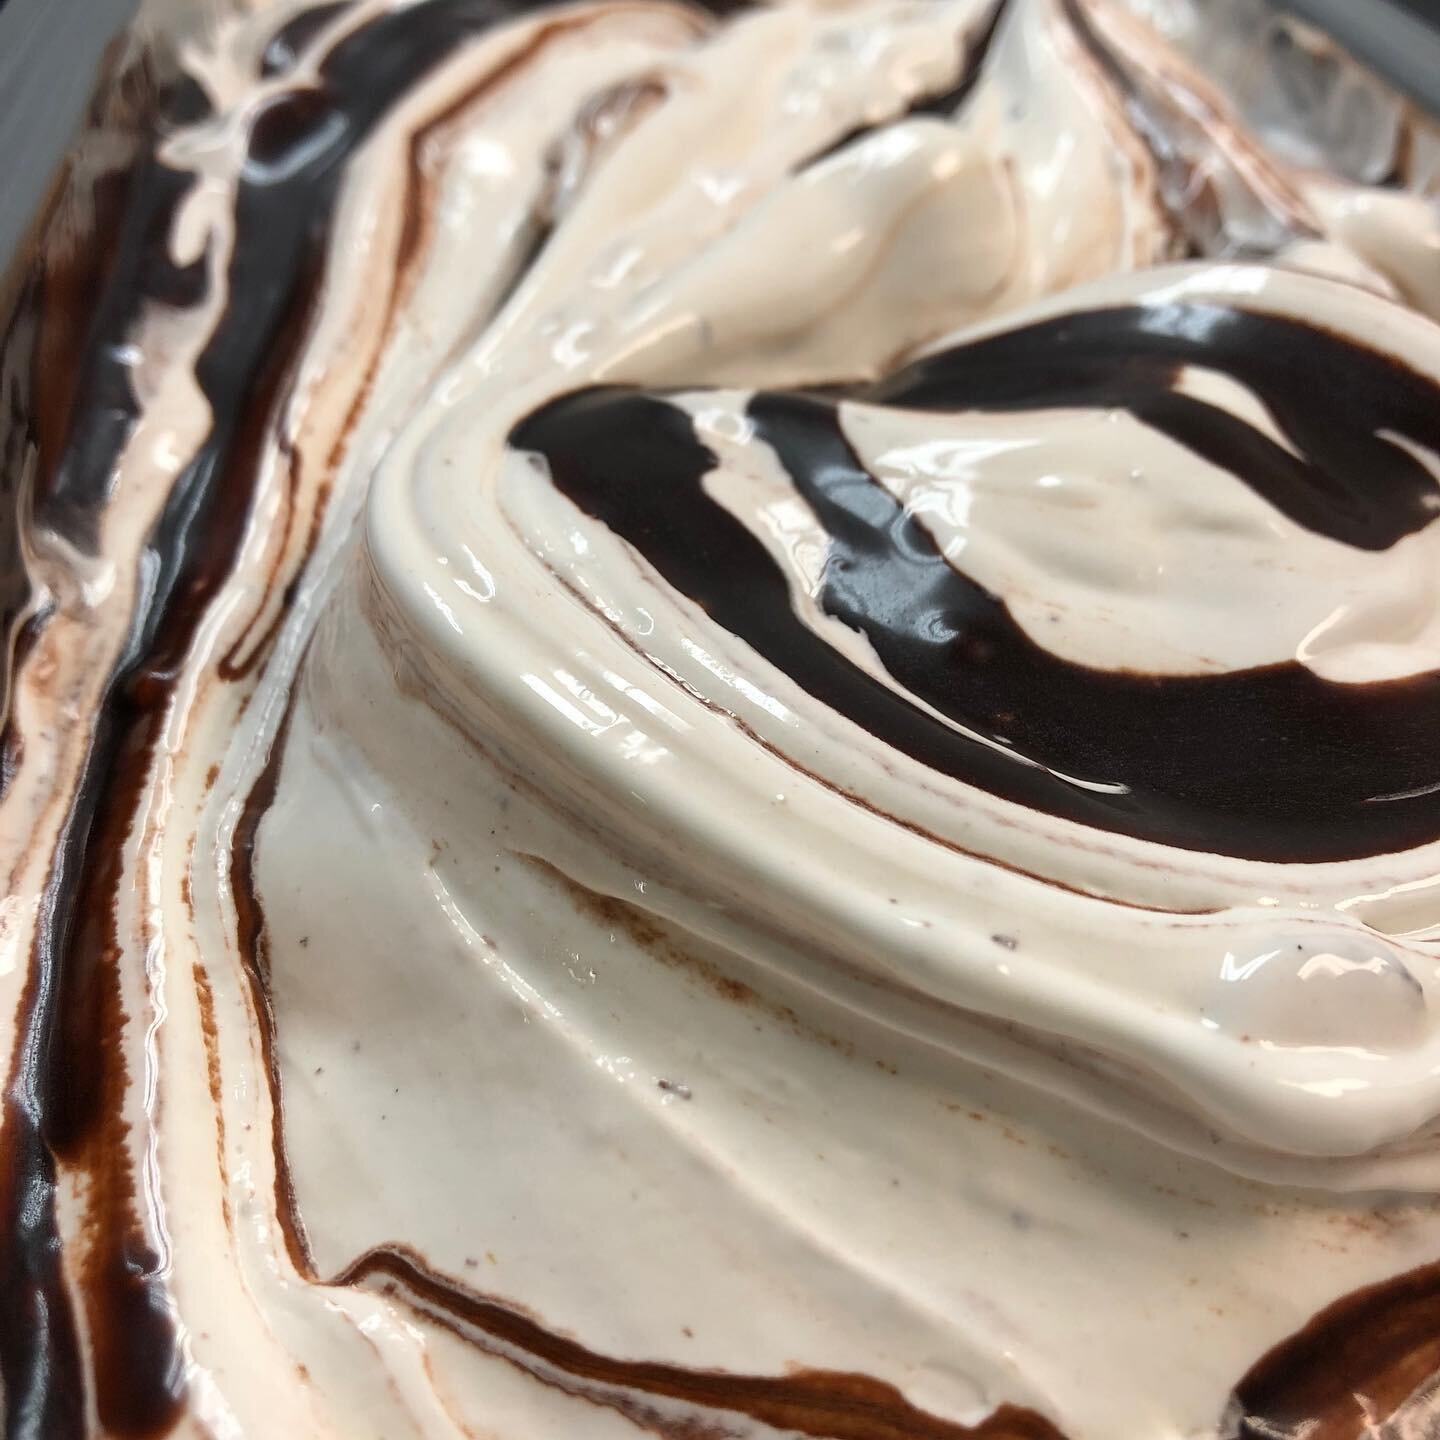 Get it while you can! Vanilla with caramel cups and hot fudge swirled in by hand. We&rsquo;re open until 9pm tonight on the second floor of @tulsaboxyard. 
#roserock #roserockmicrocreamery #tulsaboxyard